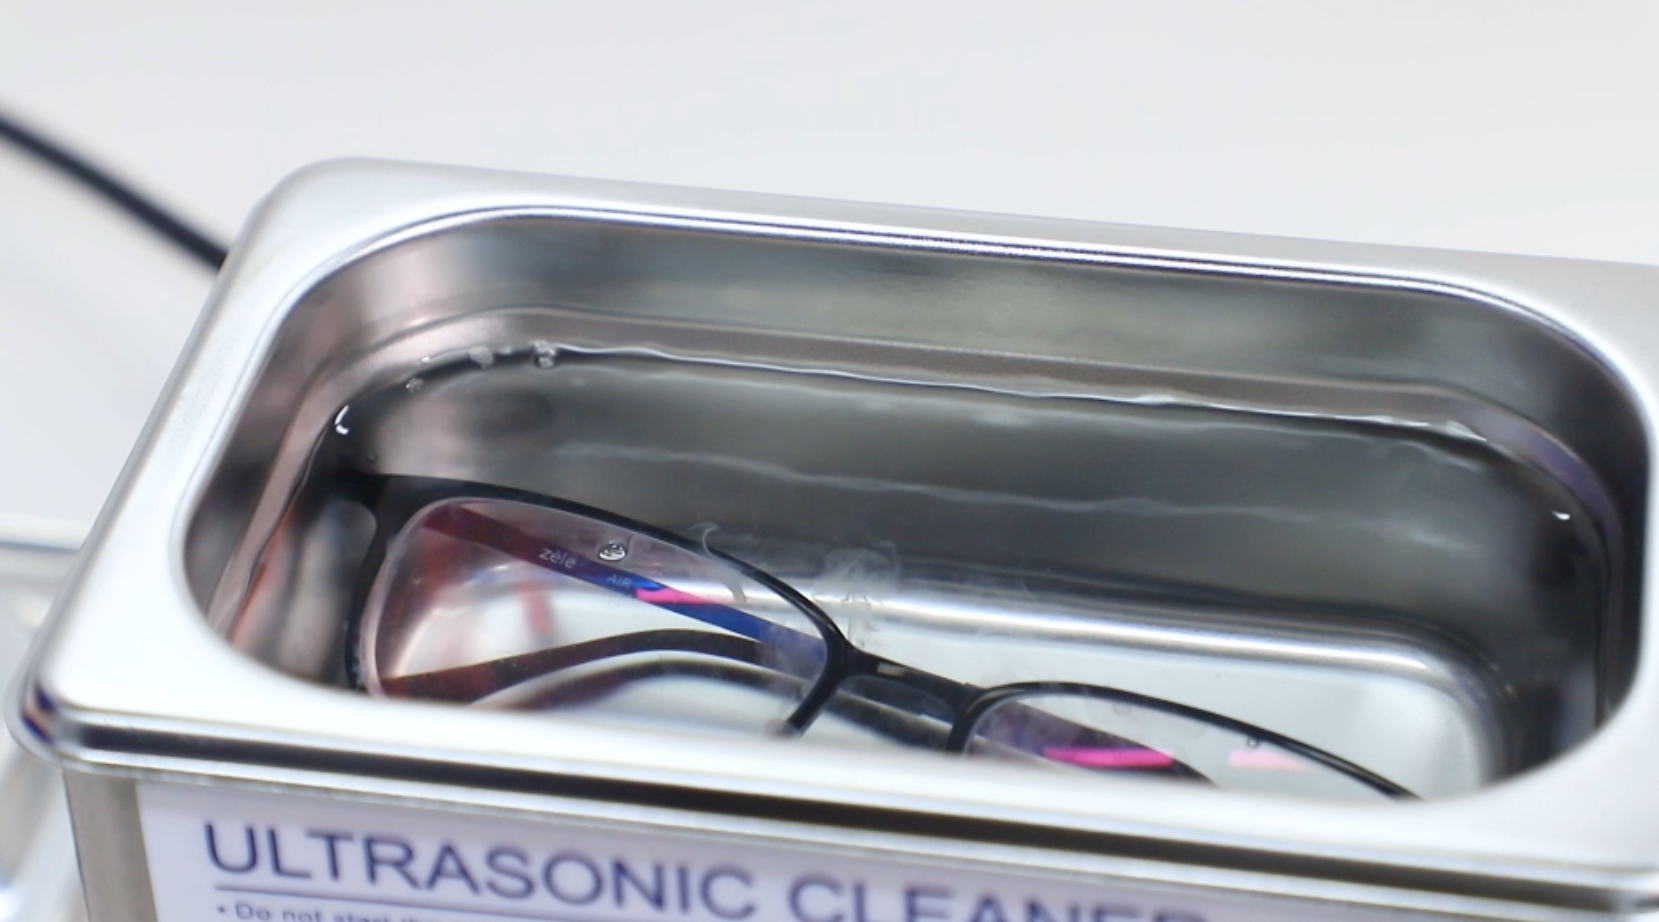 Jewelry/ Glasses/ Tooth/ Spare Parts/ Home Portable Intelligent Ultrasonic Cleaner